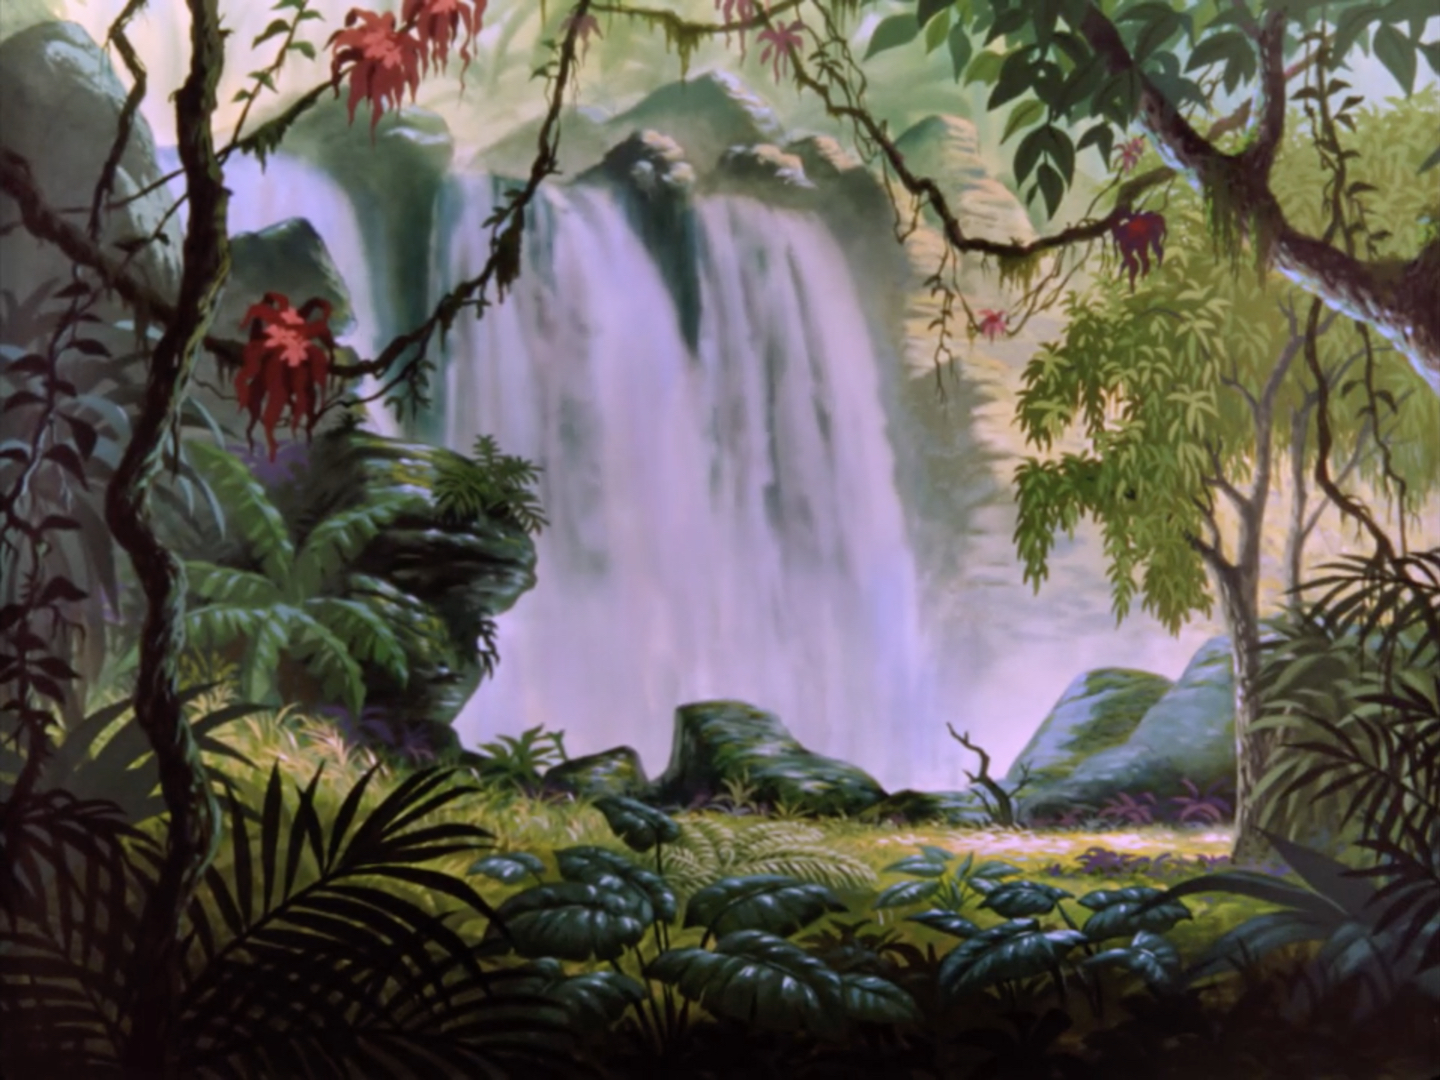 for ios download The Jungle Book